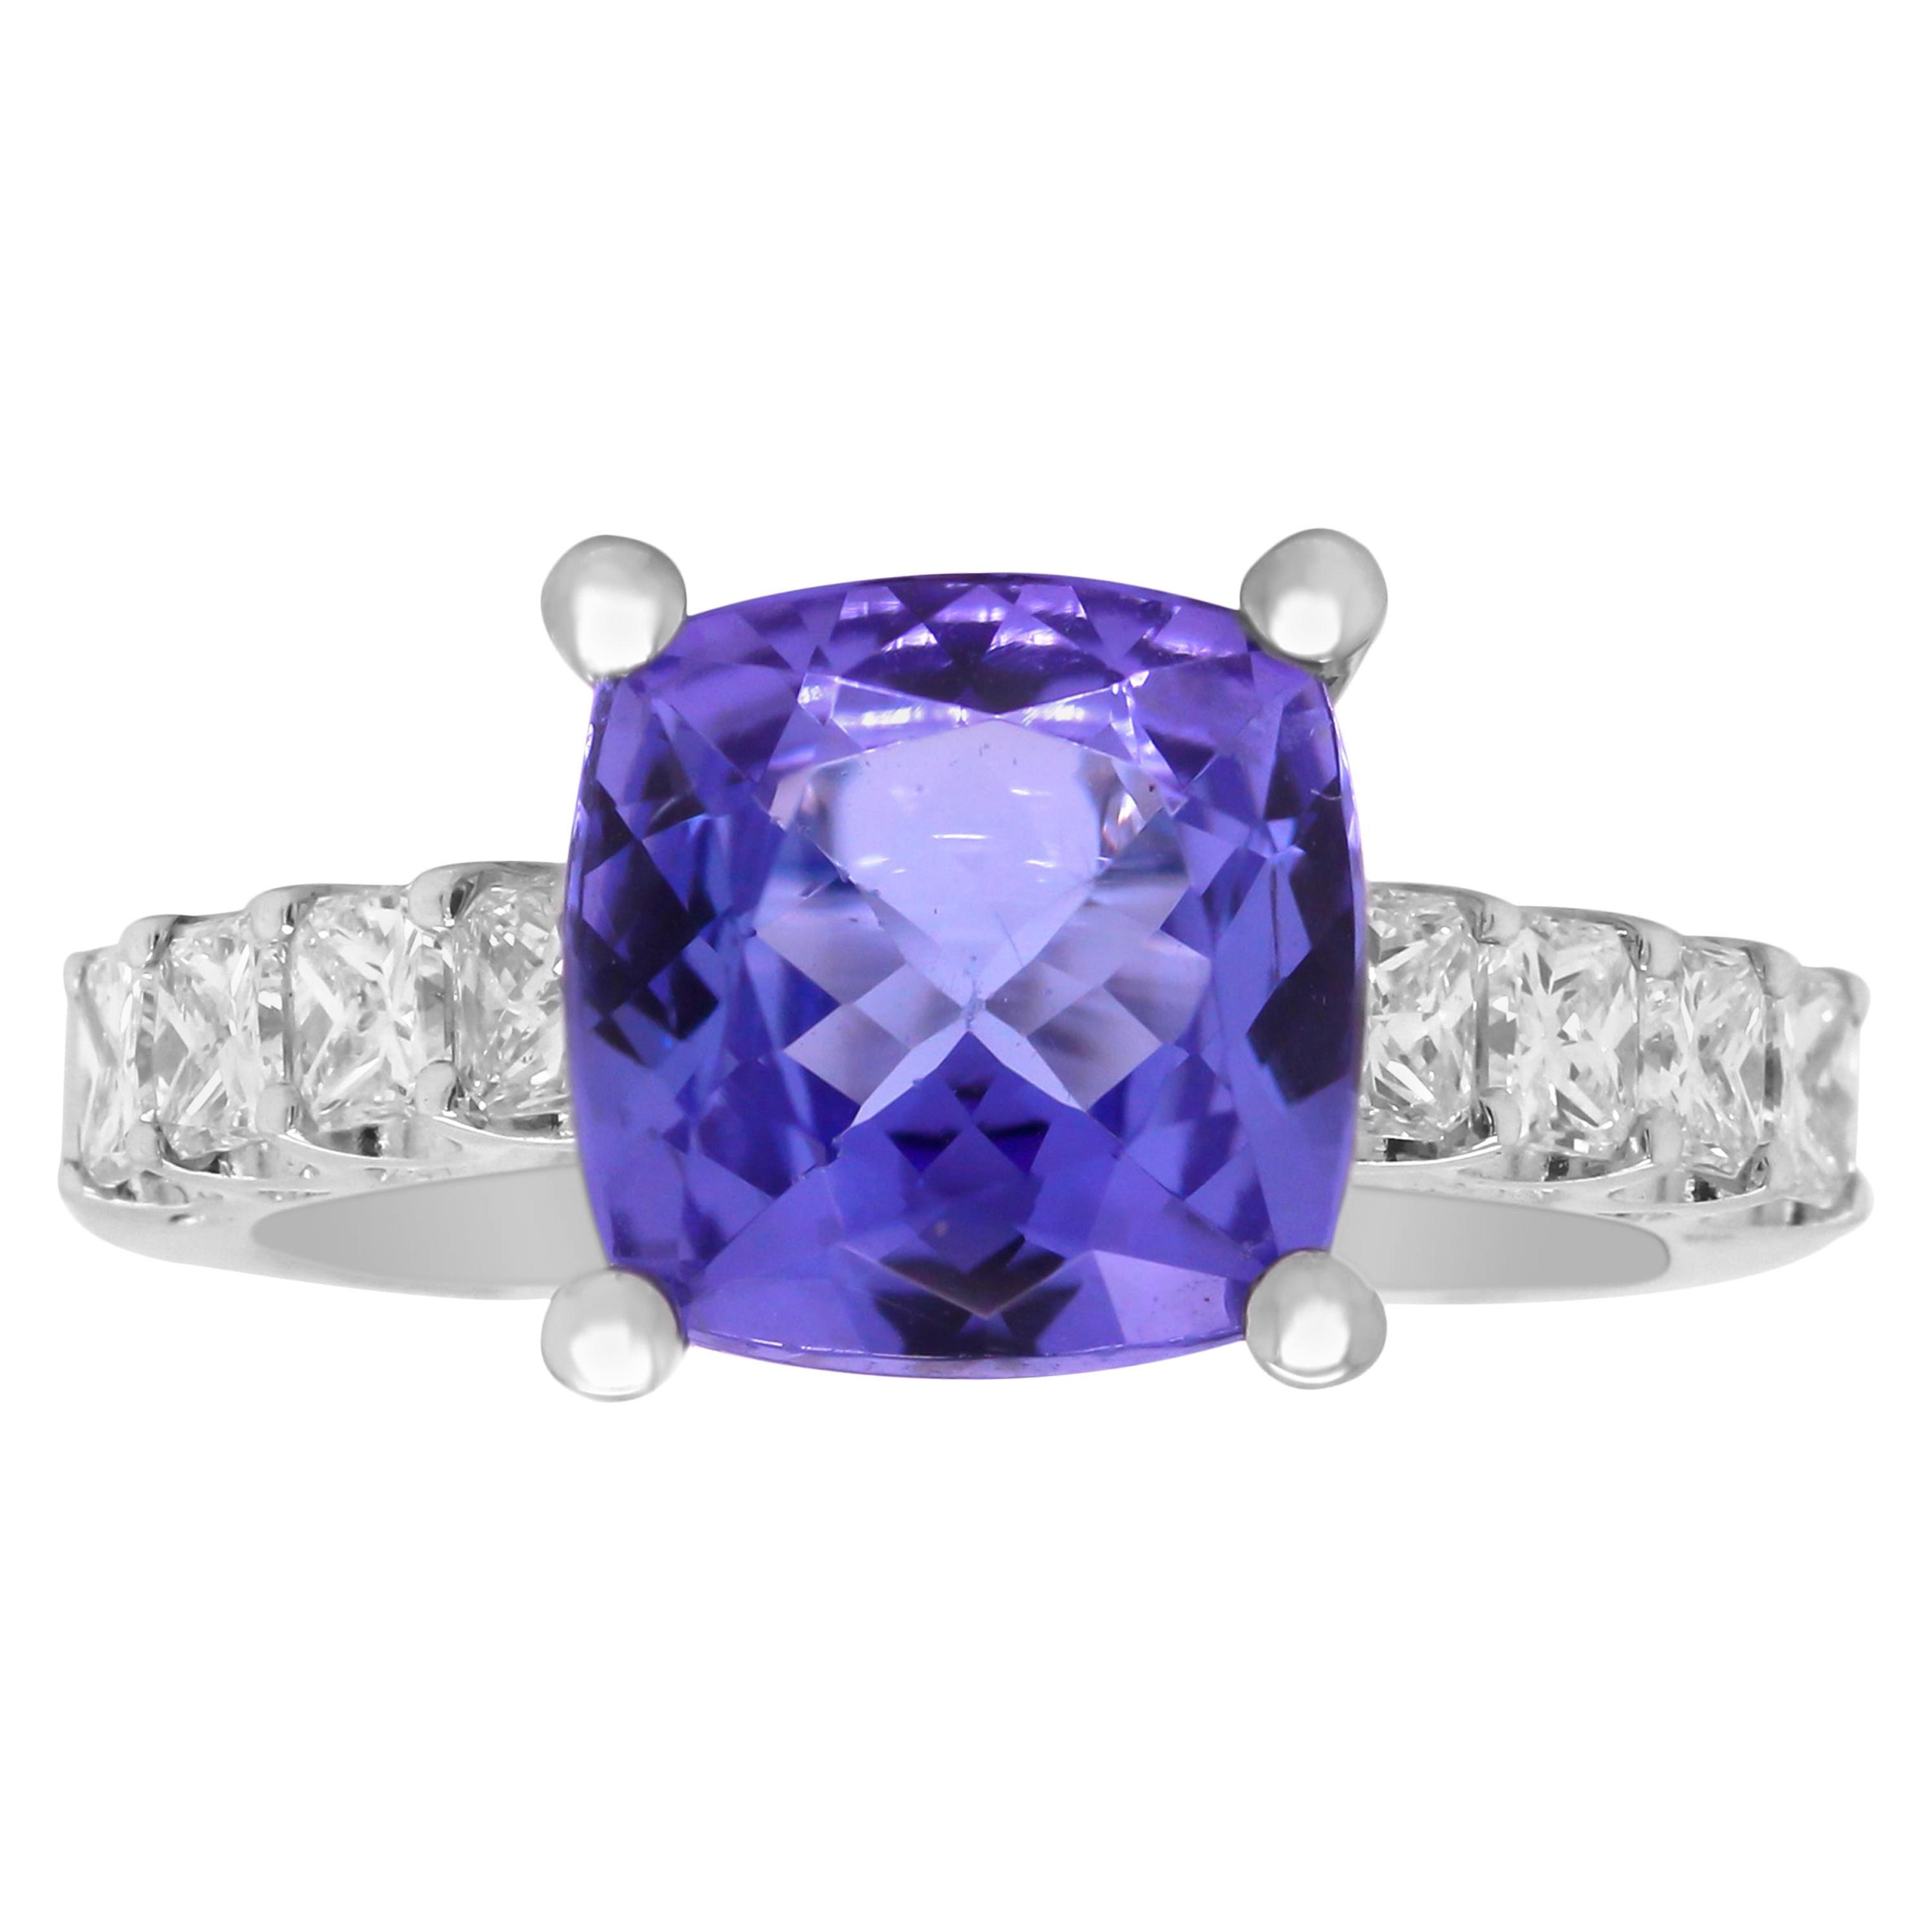 White Gold and Princess Cut Diamonds Ring with Cushion Cut Tanzanite Center For Sale